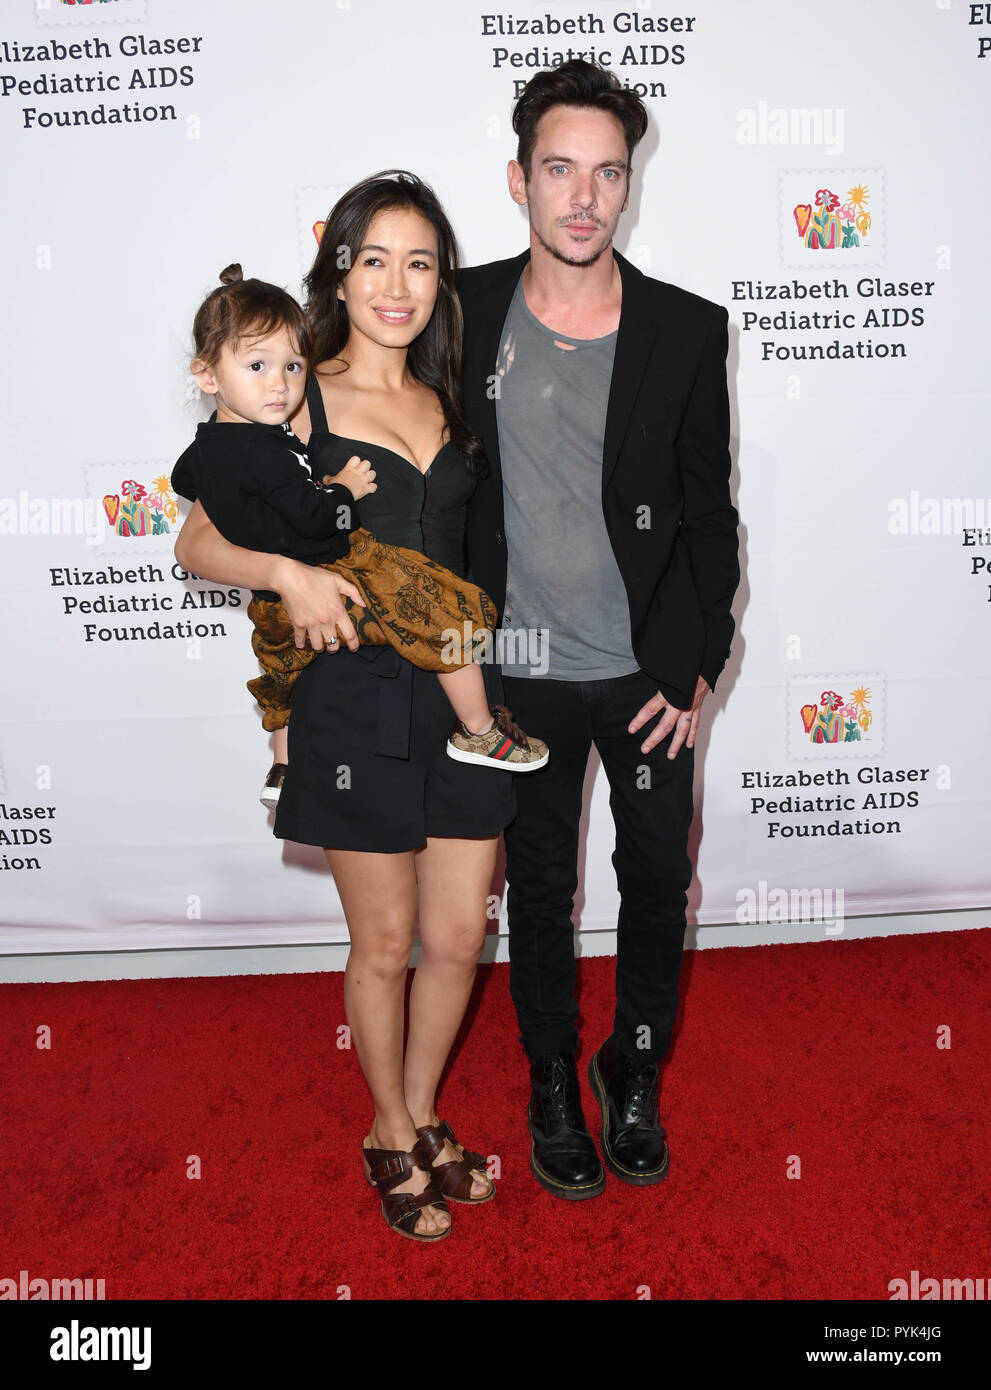 Culver City, CA, USA. 27th Oct, 2018. 27 October 2018 - Culver City, California - Mara Lane, Jonathan Rhys Meyers. The Elizabeth Glaser Pediatric AIDS Foundation's Annual ''A Time For Heroes'' Family Festival held at Smashbox Studios. Photo Credit: Birdie Thompson/AdMedia Credit: Birdie Thompson/AdMedia/ZUMA Wire/Alamy Live News Stock Photo